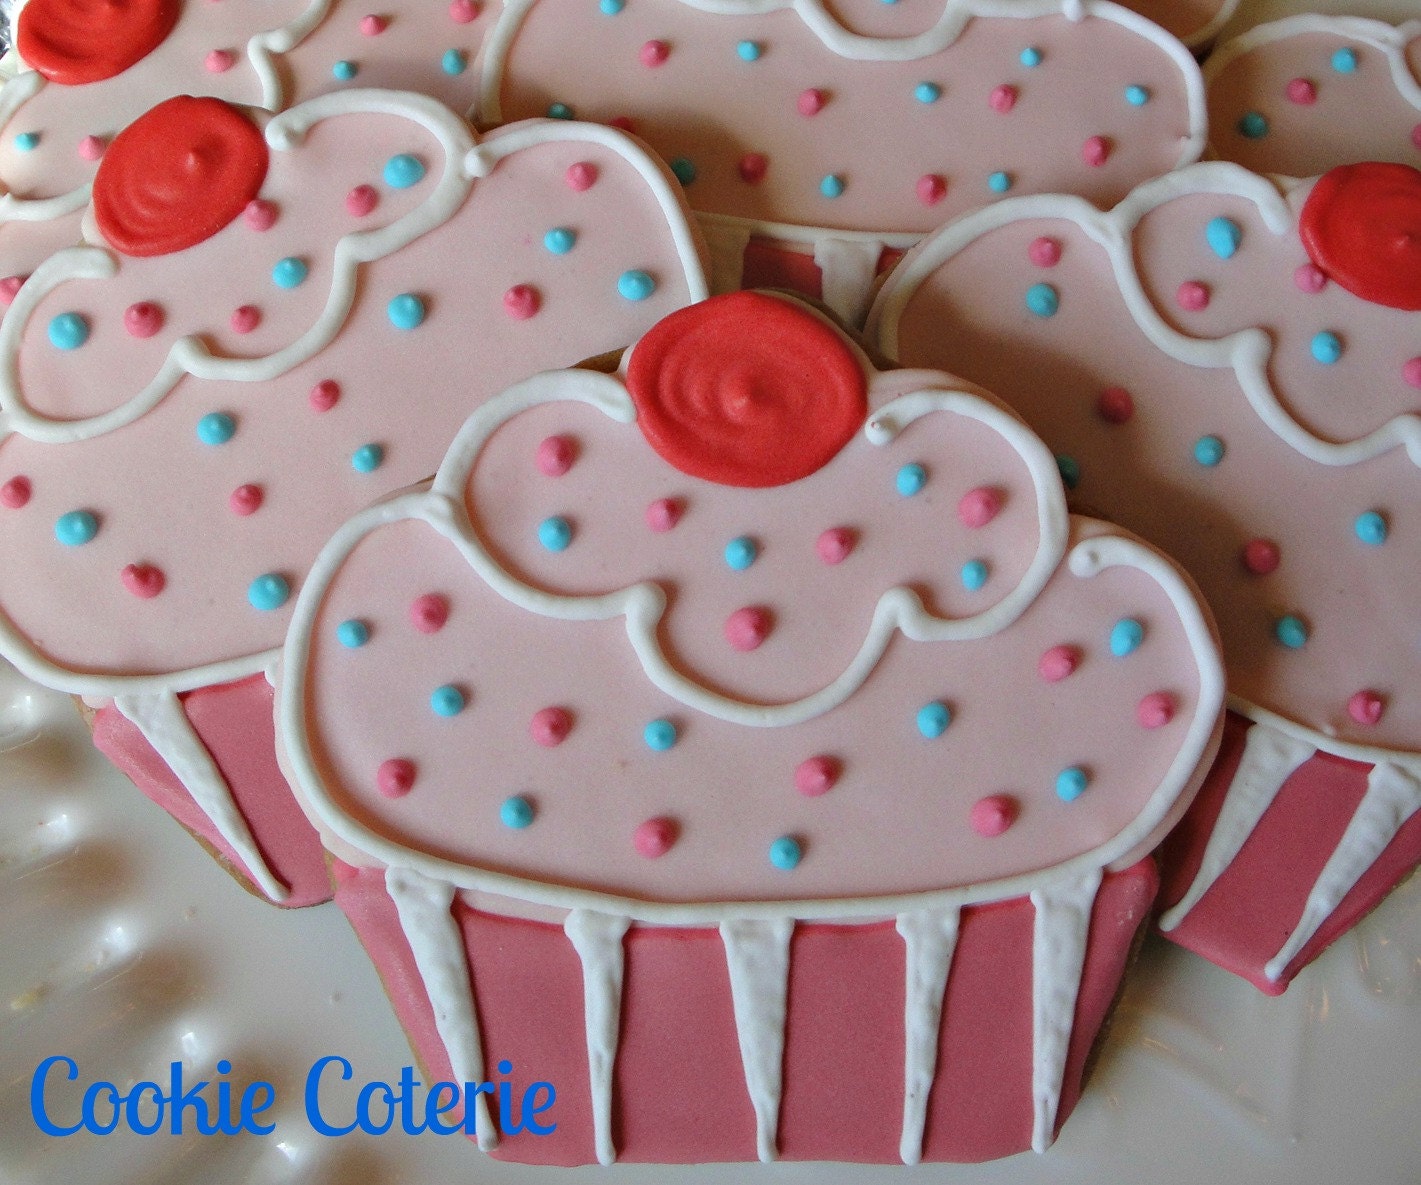 Popular items for shower cookie favor on Etsy